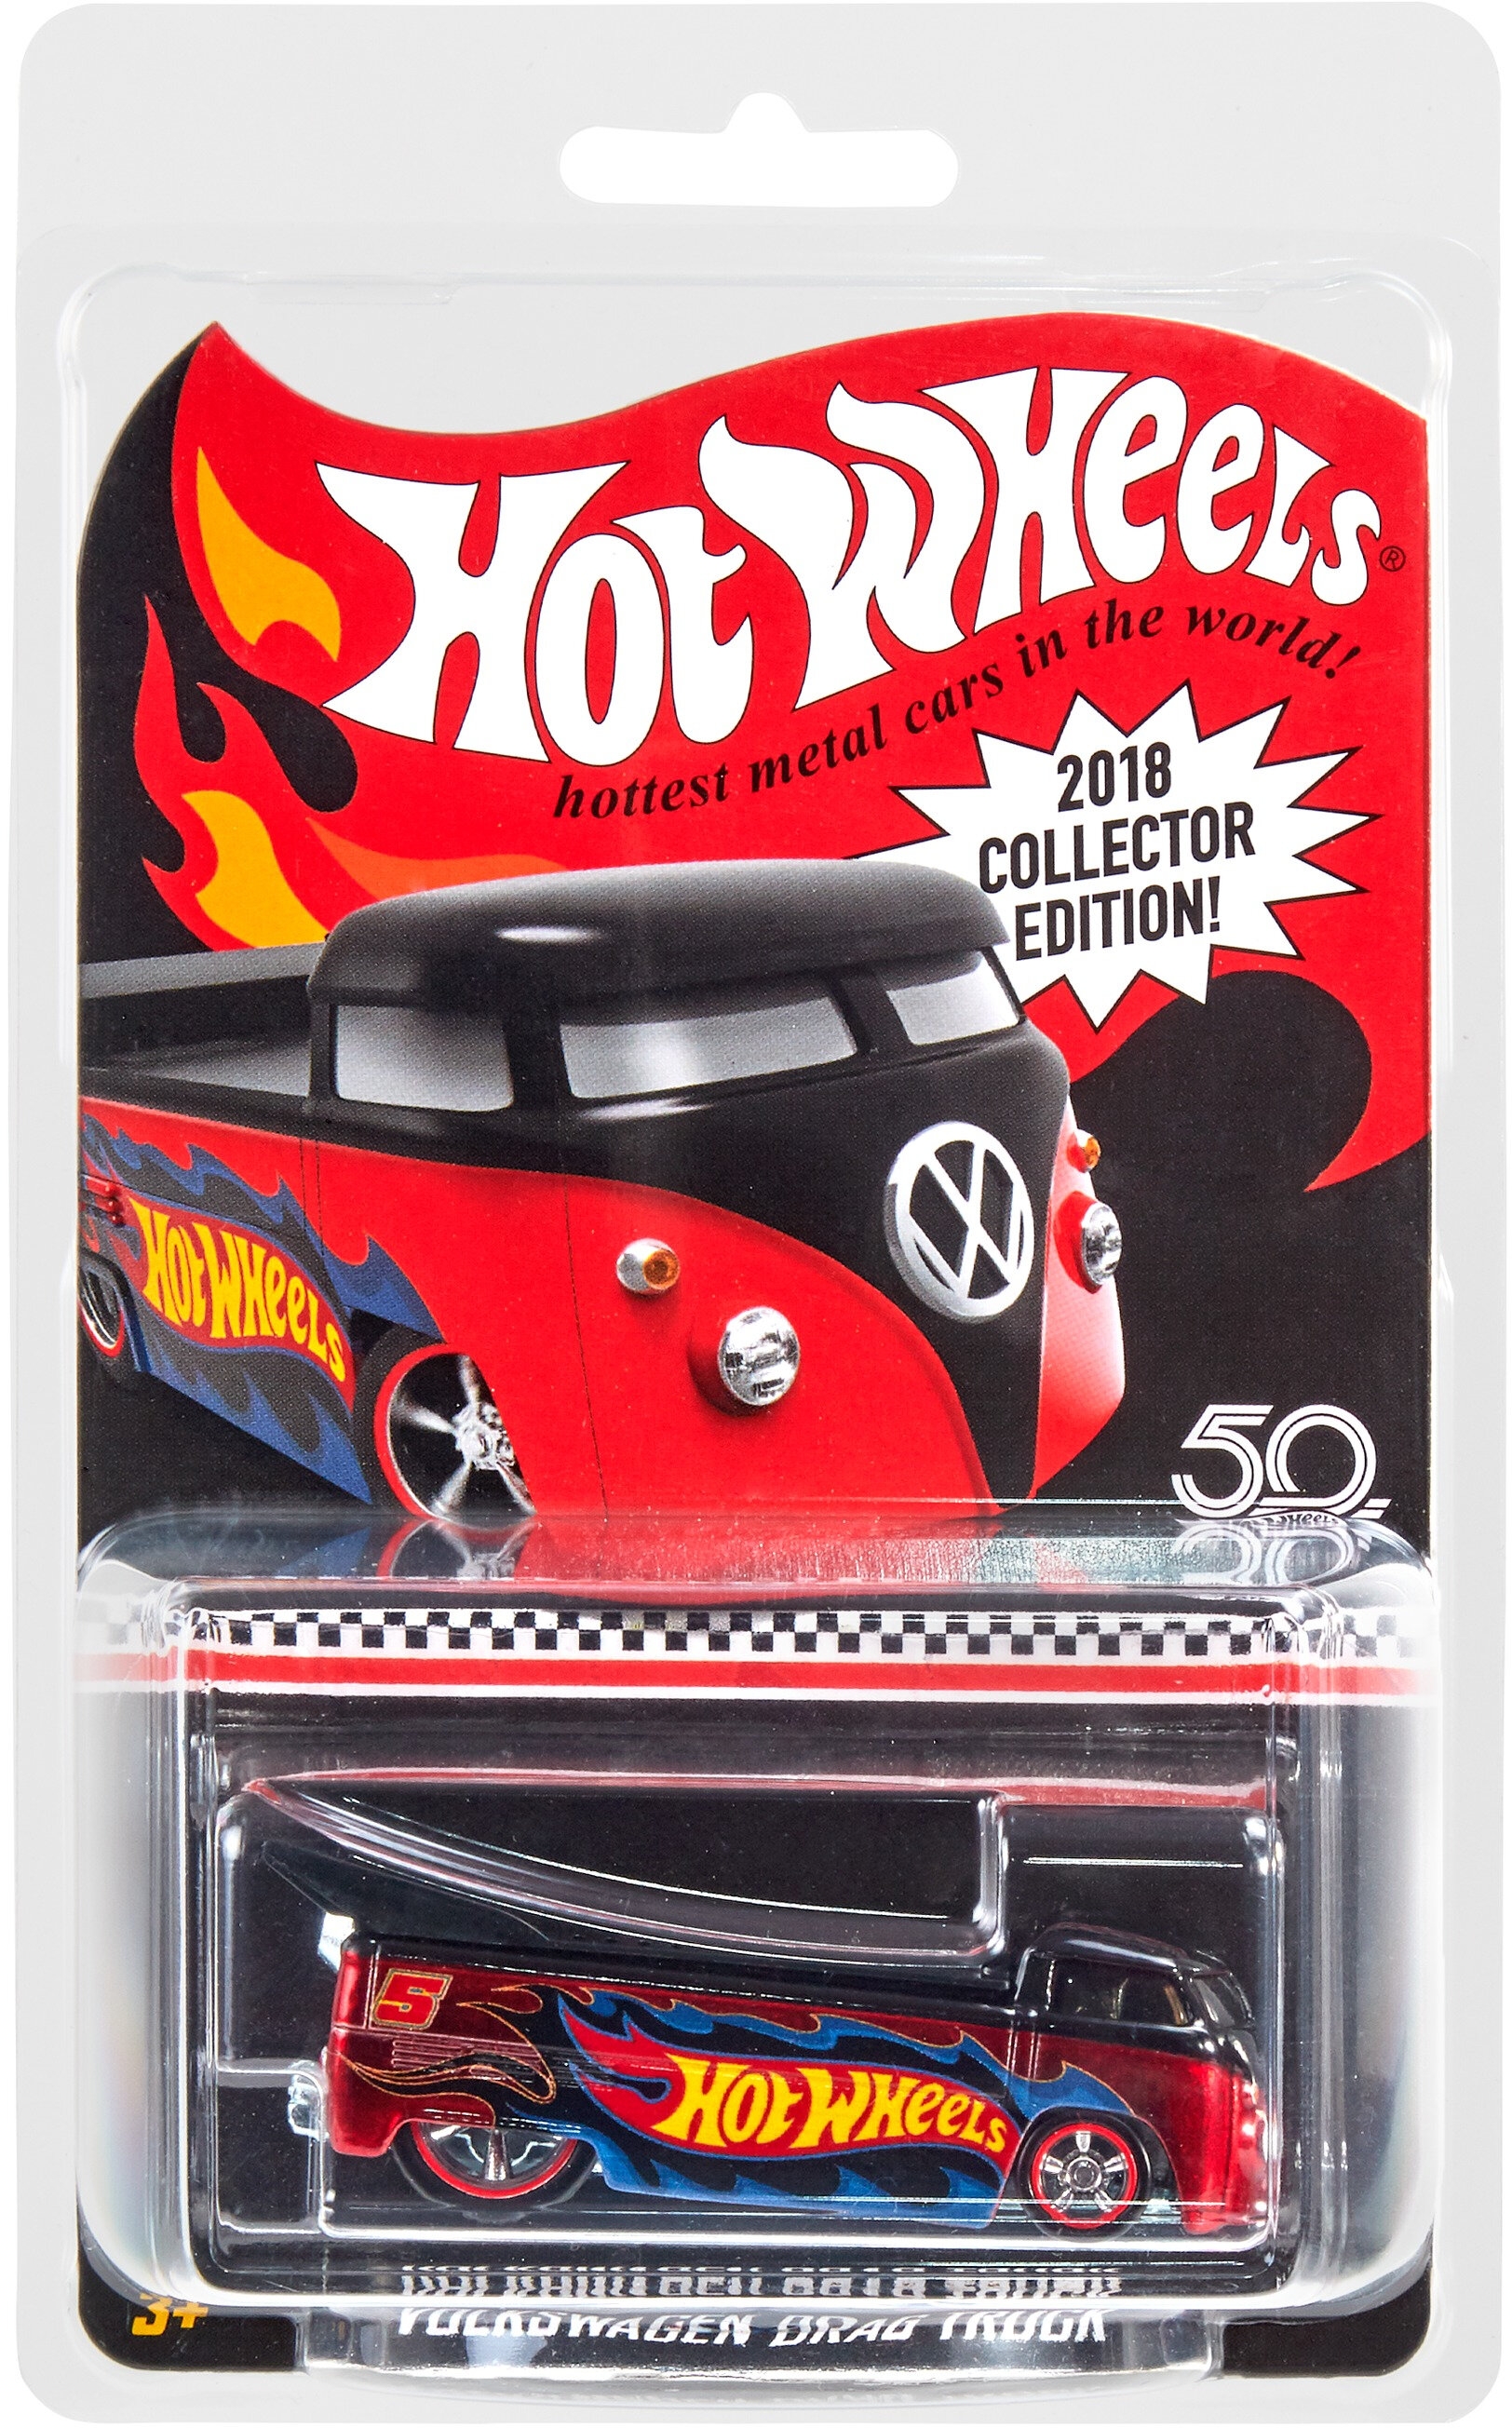 Hot Wheels Custom '38 Ford Coe, Die-Cast Collectible Toy Car in 1:64 Scale